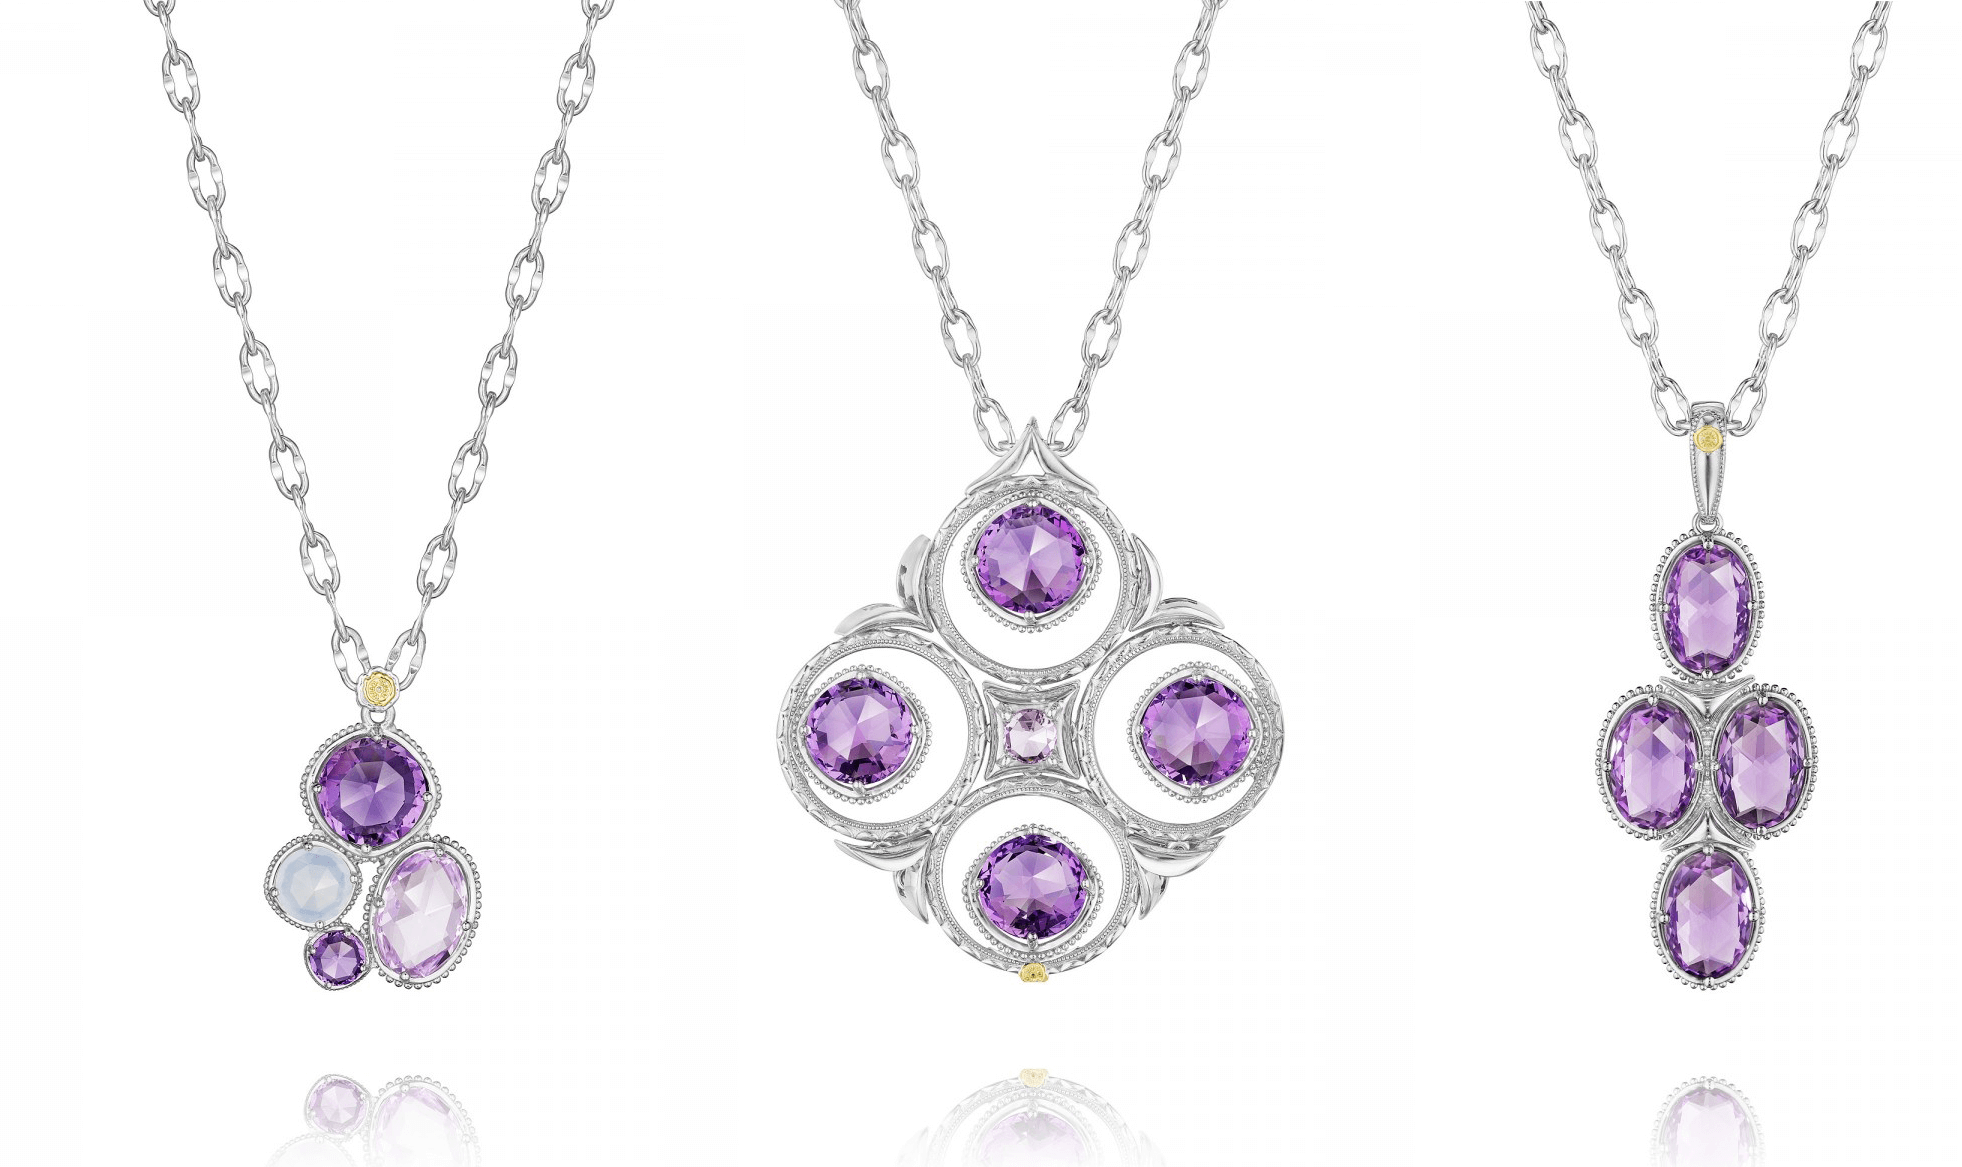 Tacori Necklaces at Costello Jewelry Company in Naperville and Glen Ellyn, Illinois